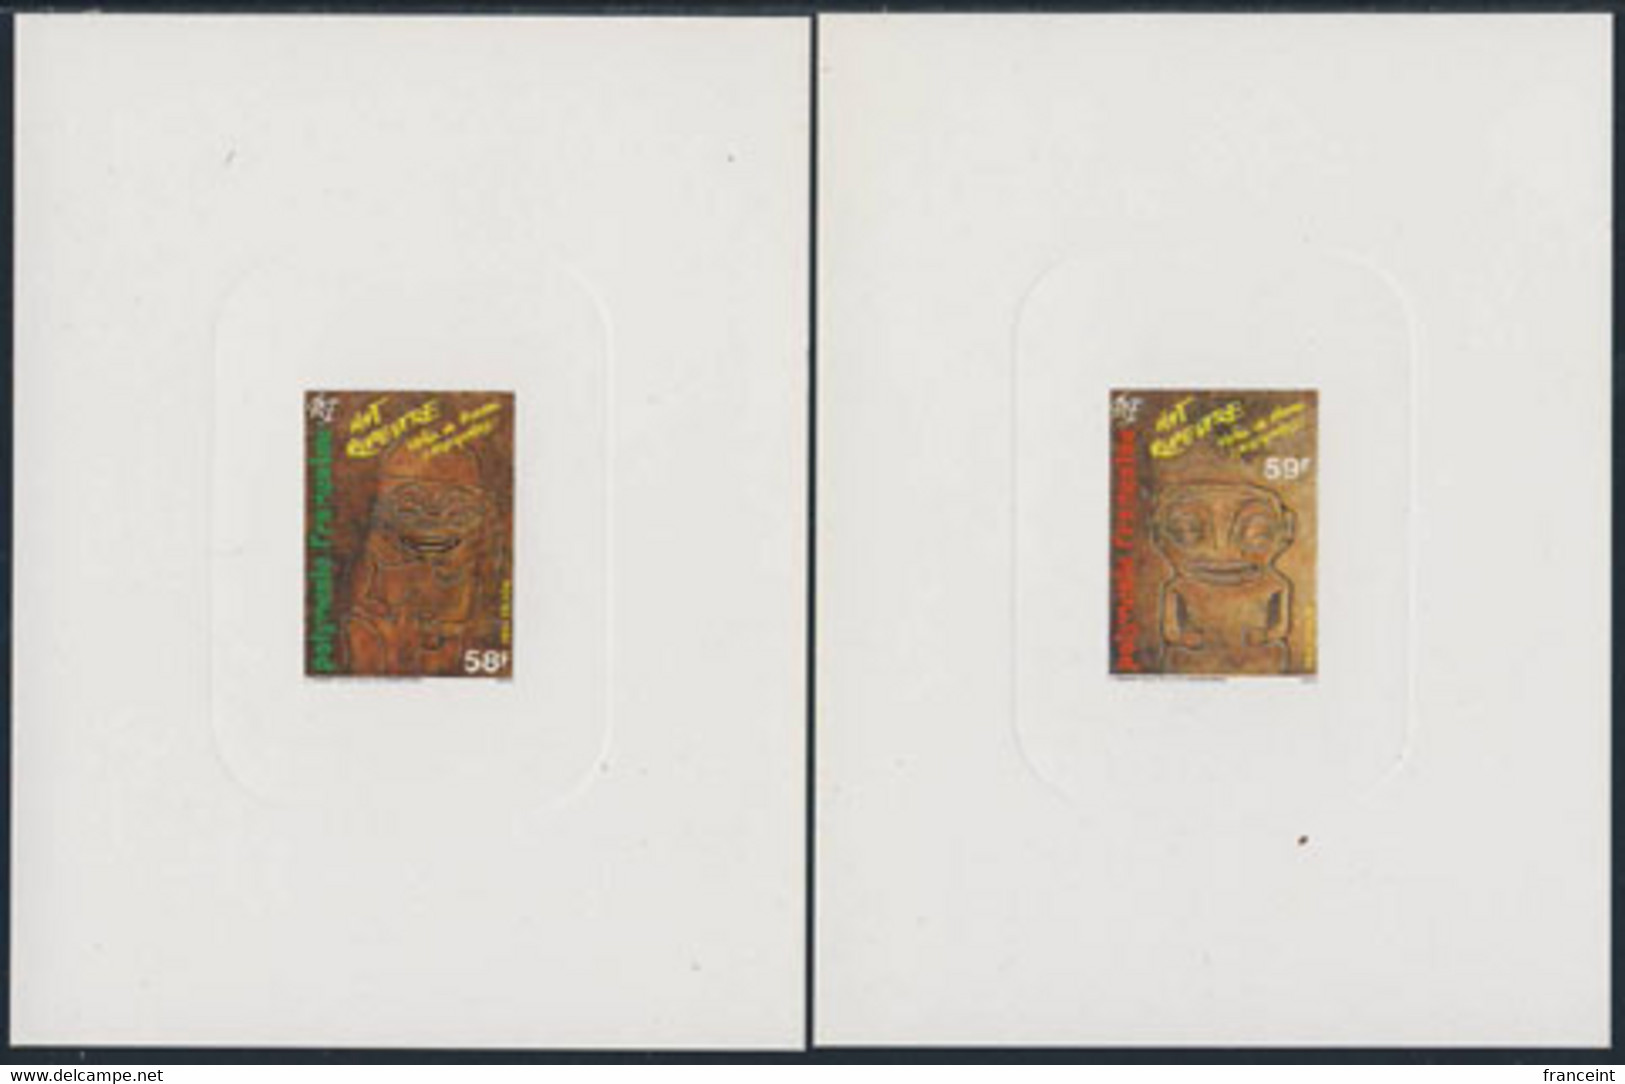 FRENCH POLYNESIA (1986) Tiki Rock Carvings. Set Of 2 Deluxe Sheets. Scott Nos 436-7, Yvert Nos 259-60. - Imperforates, Proofs & Errors